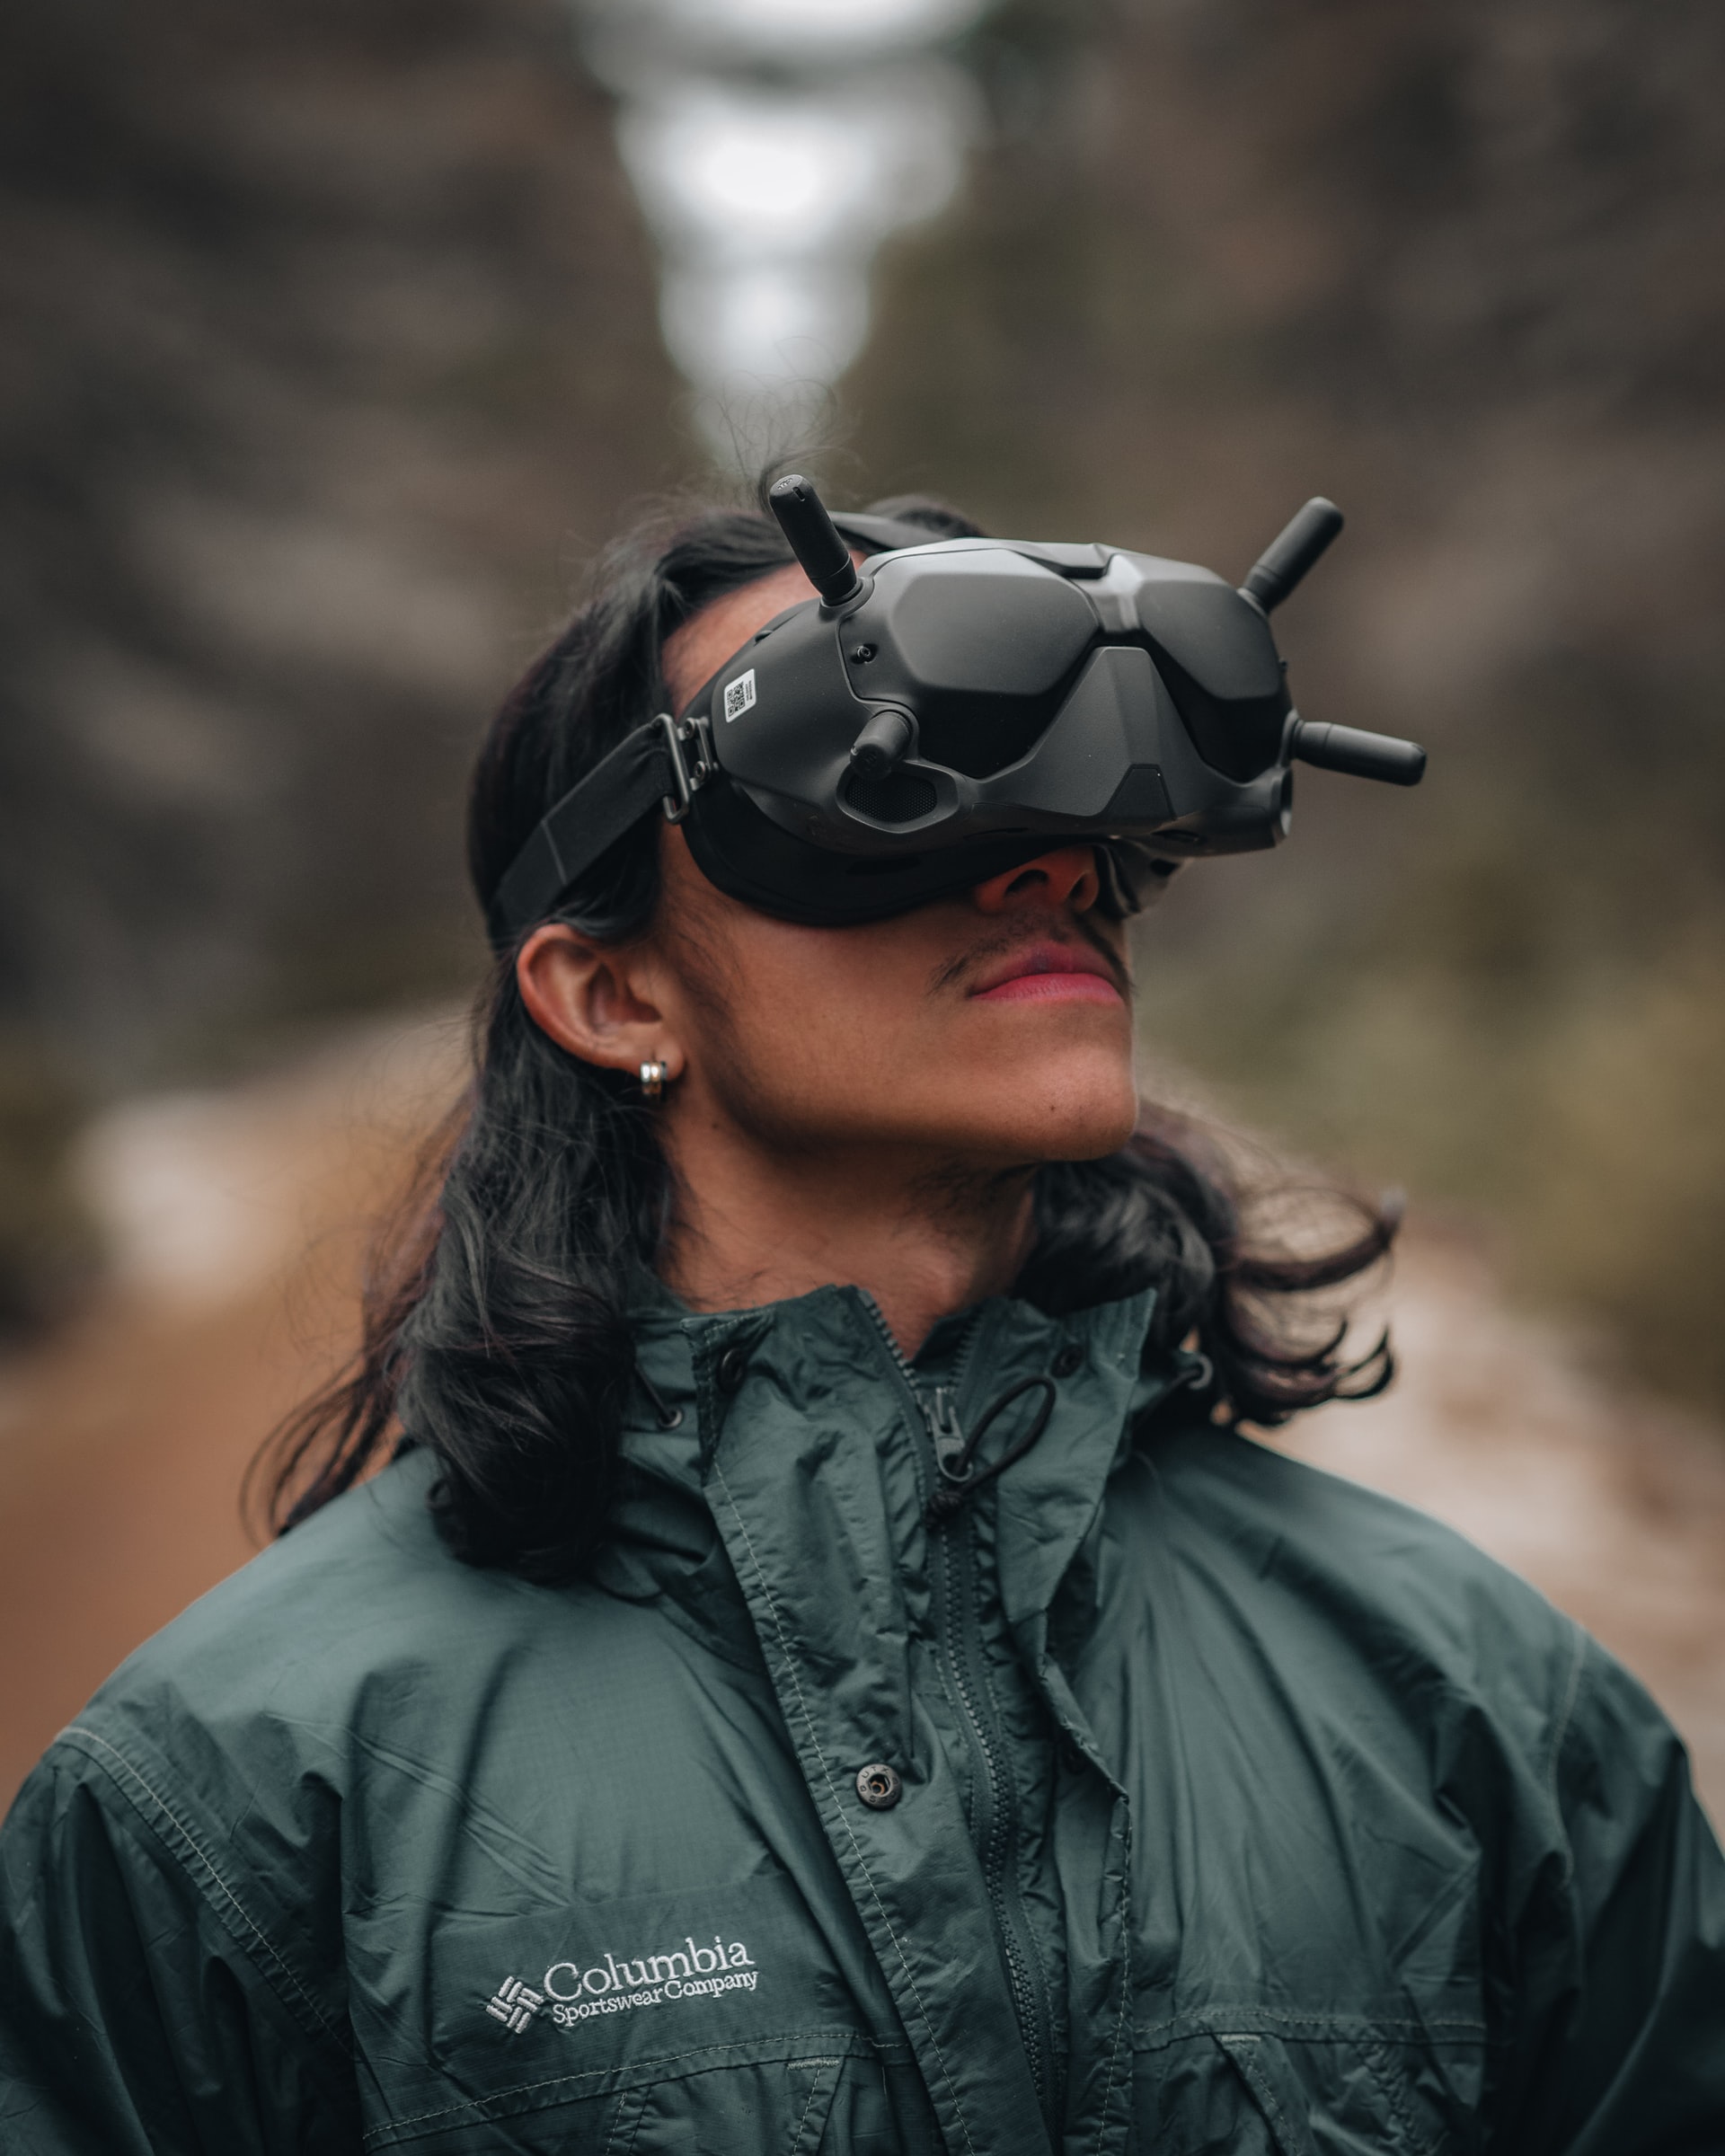 The image features a man with long dark hair and a green, Colombia anorak on. He is wearing black virtual reality goggles and looking upwards.